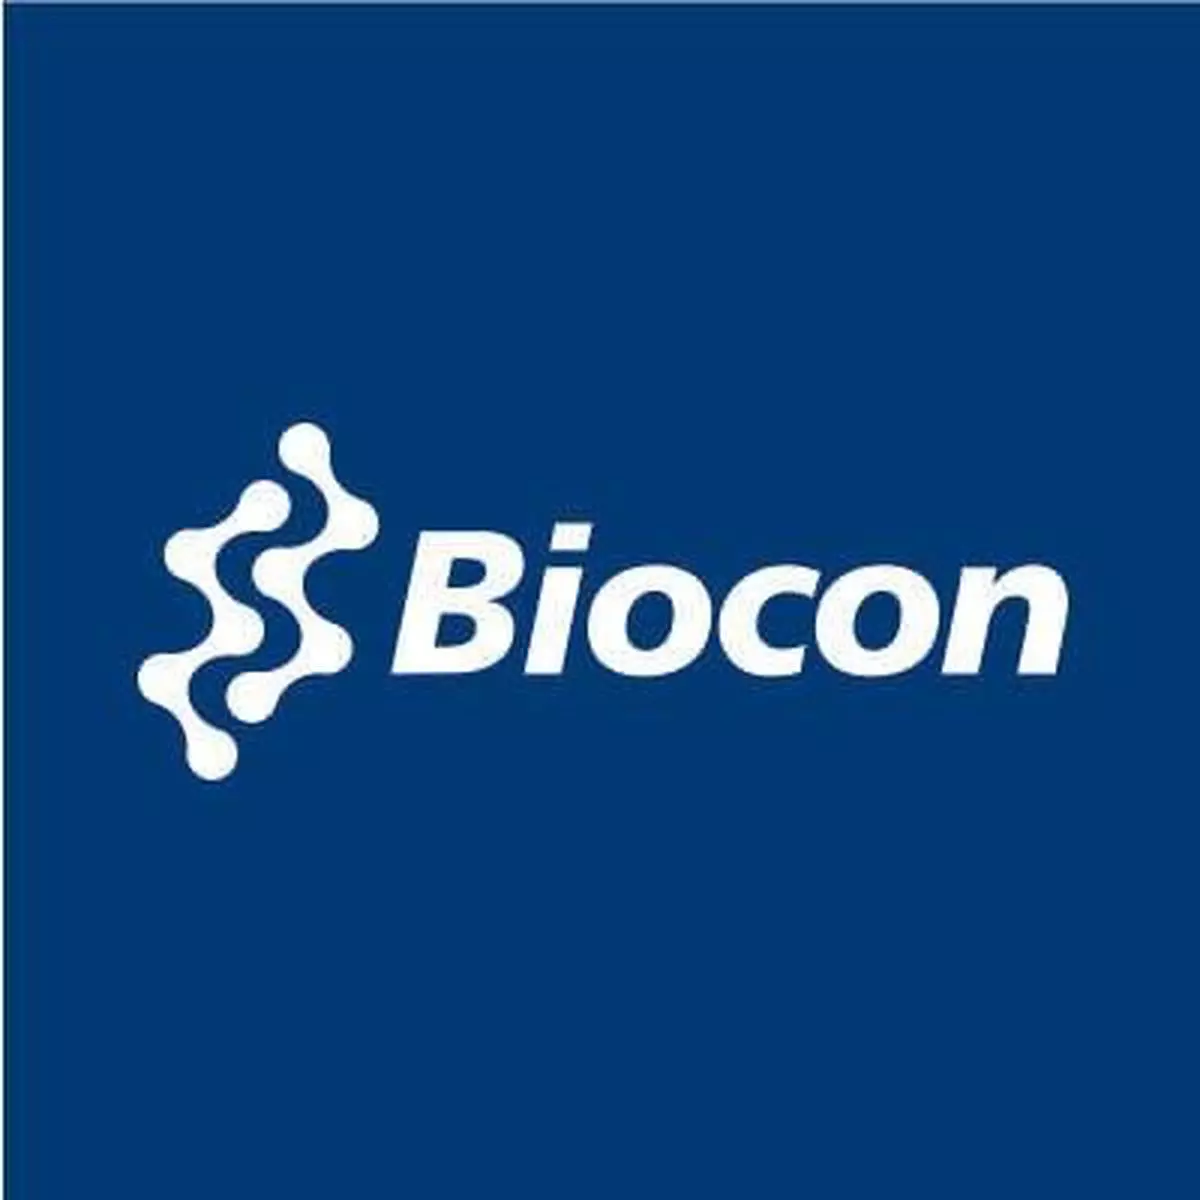 Biocon also announced that its biosimilar insulin Glargine (Semglee) and biosimilar Adalimumab have been launched by Mylan in Europe.